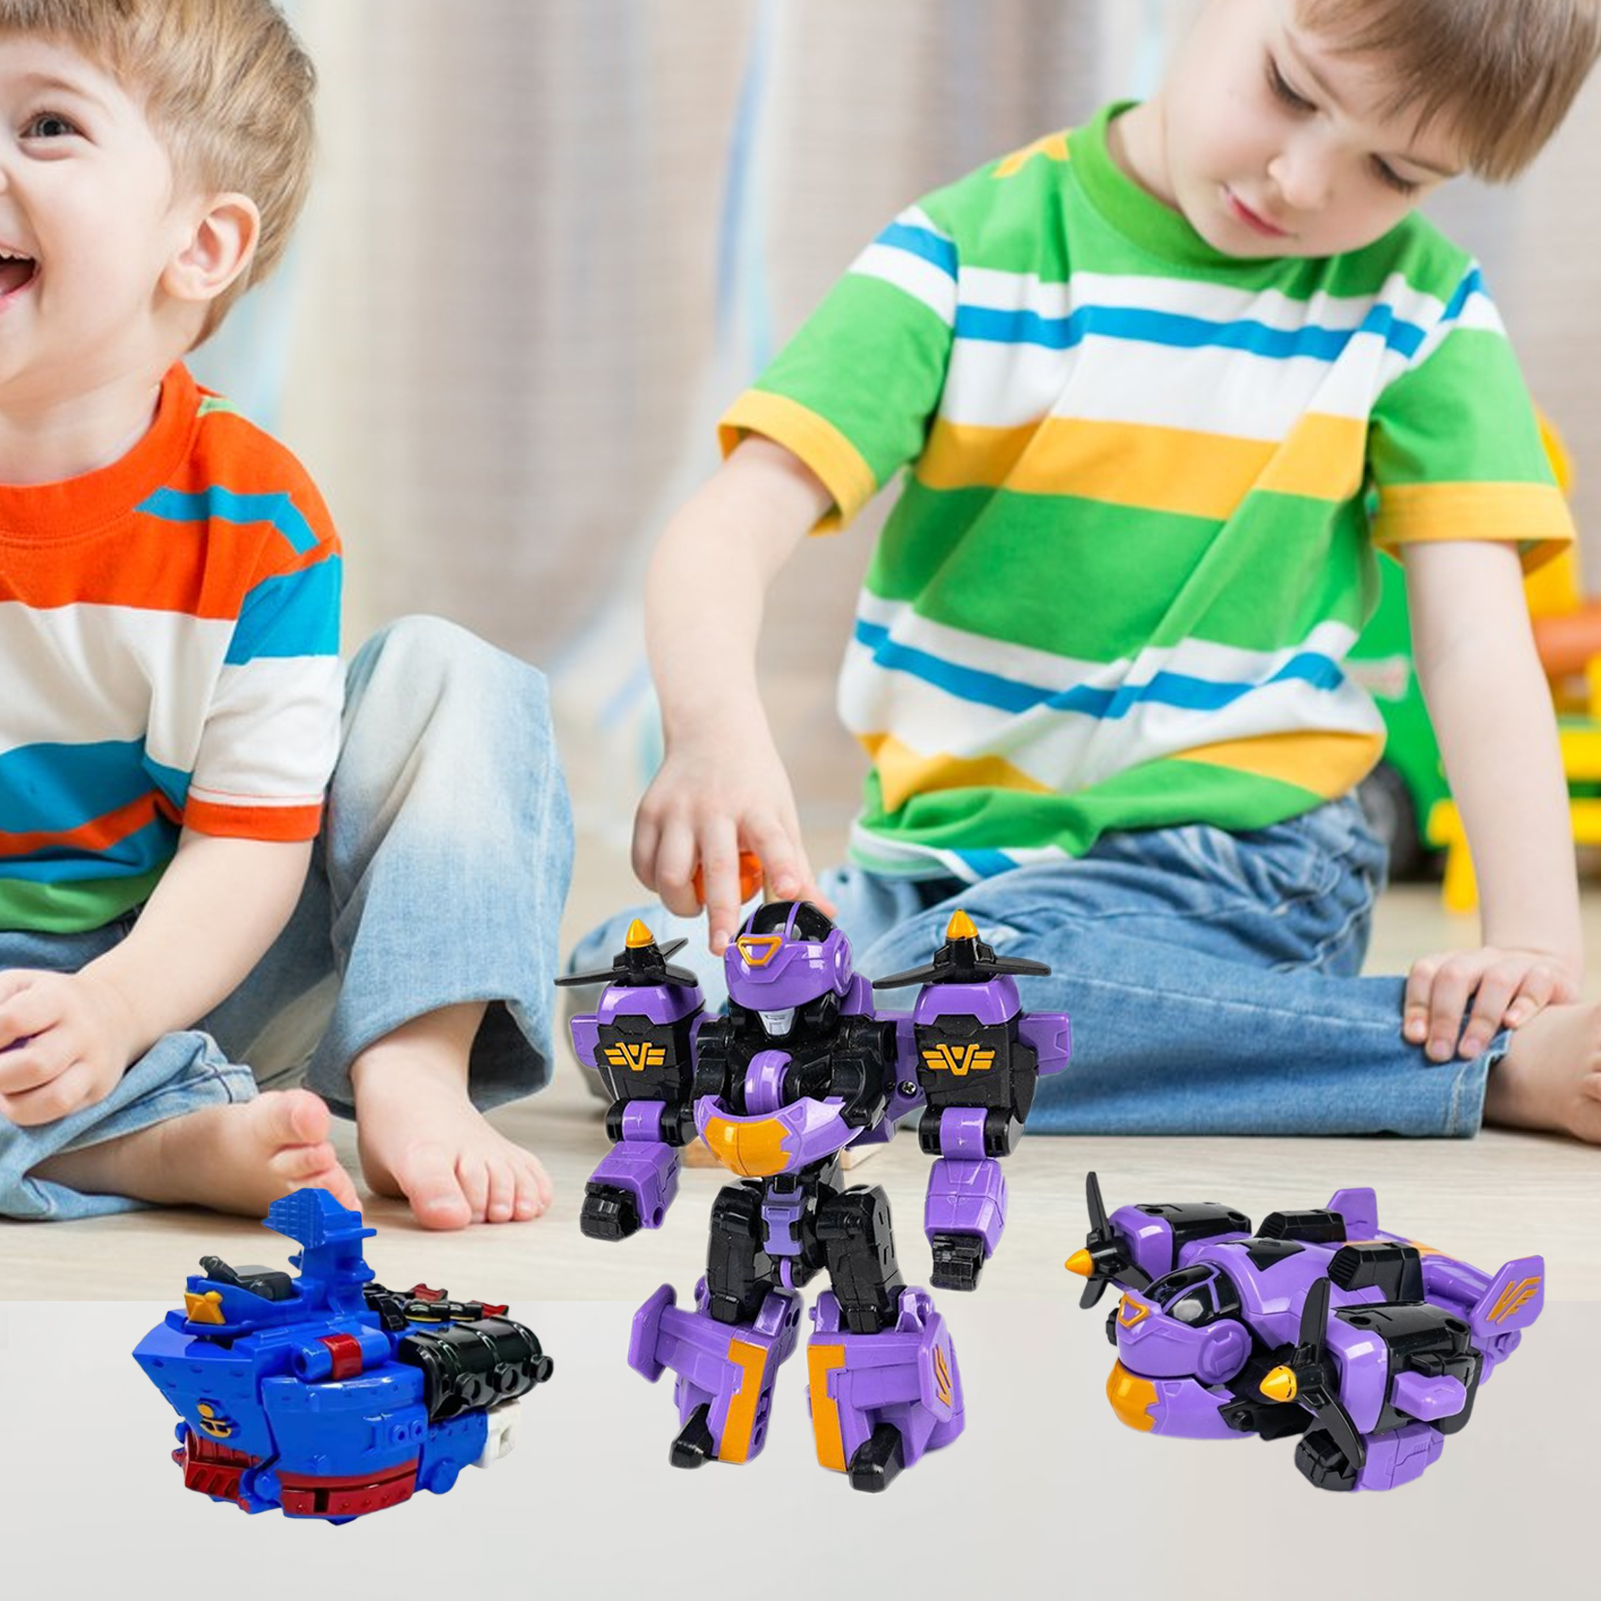 QCTime 15cm Robot Transformer Toy Various Style Fast Fighter Aircraft Tractor Tank Train Cartoon Model Toy Collectible Children Robot Transforming Vehicles Toy Birthday Gift - image 4 of 10